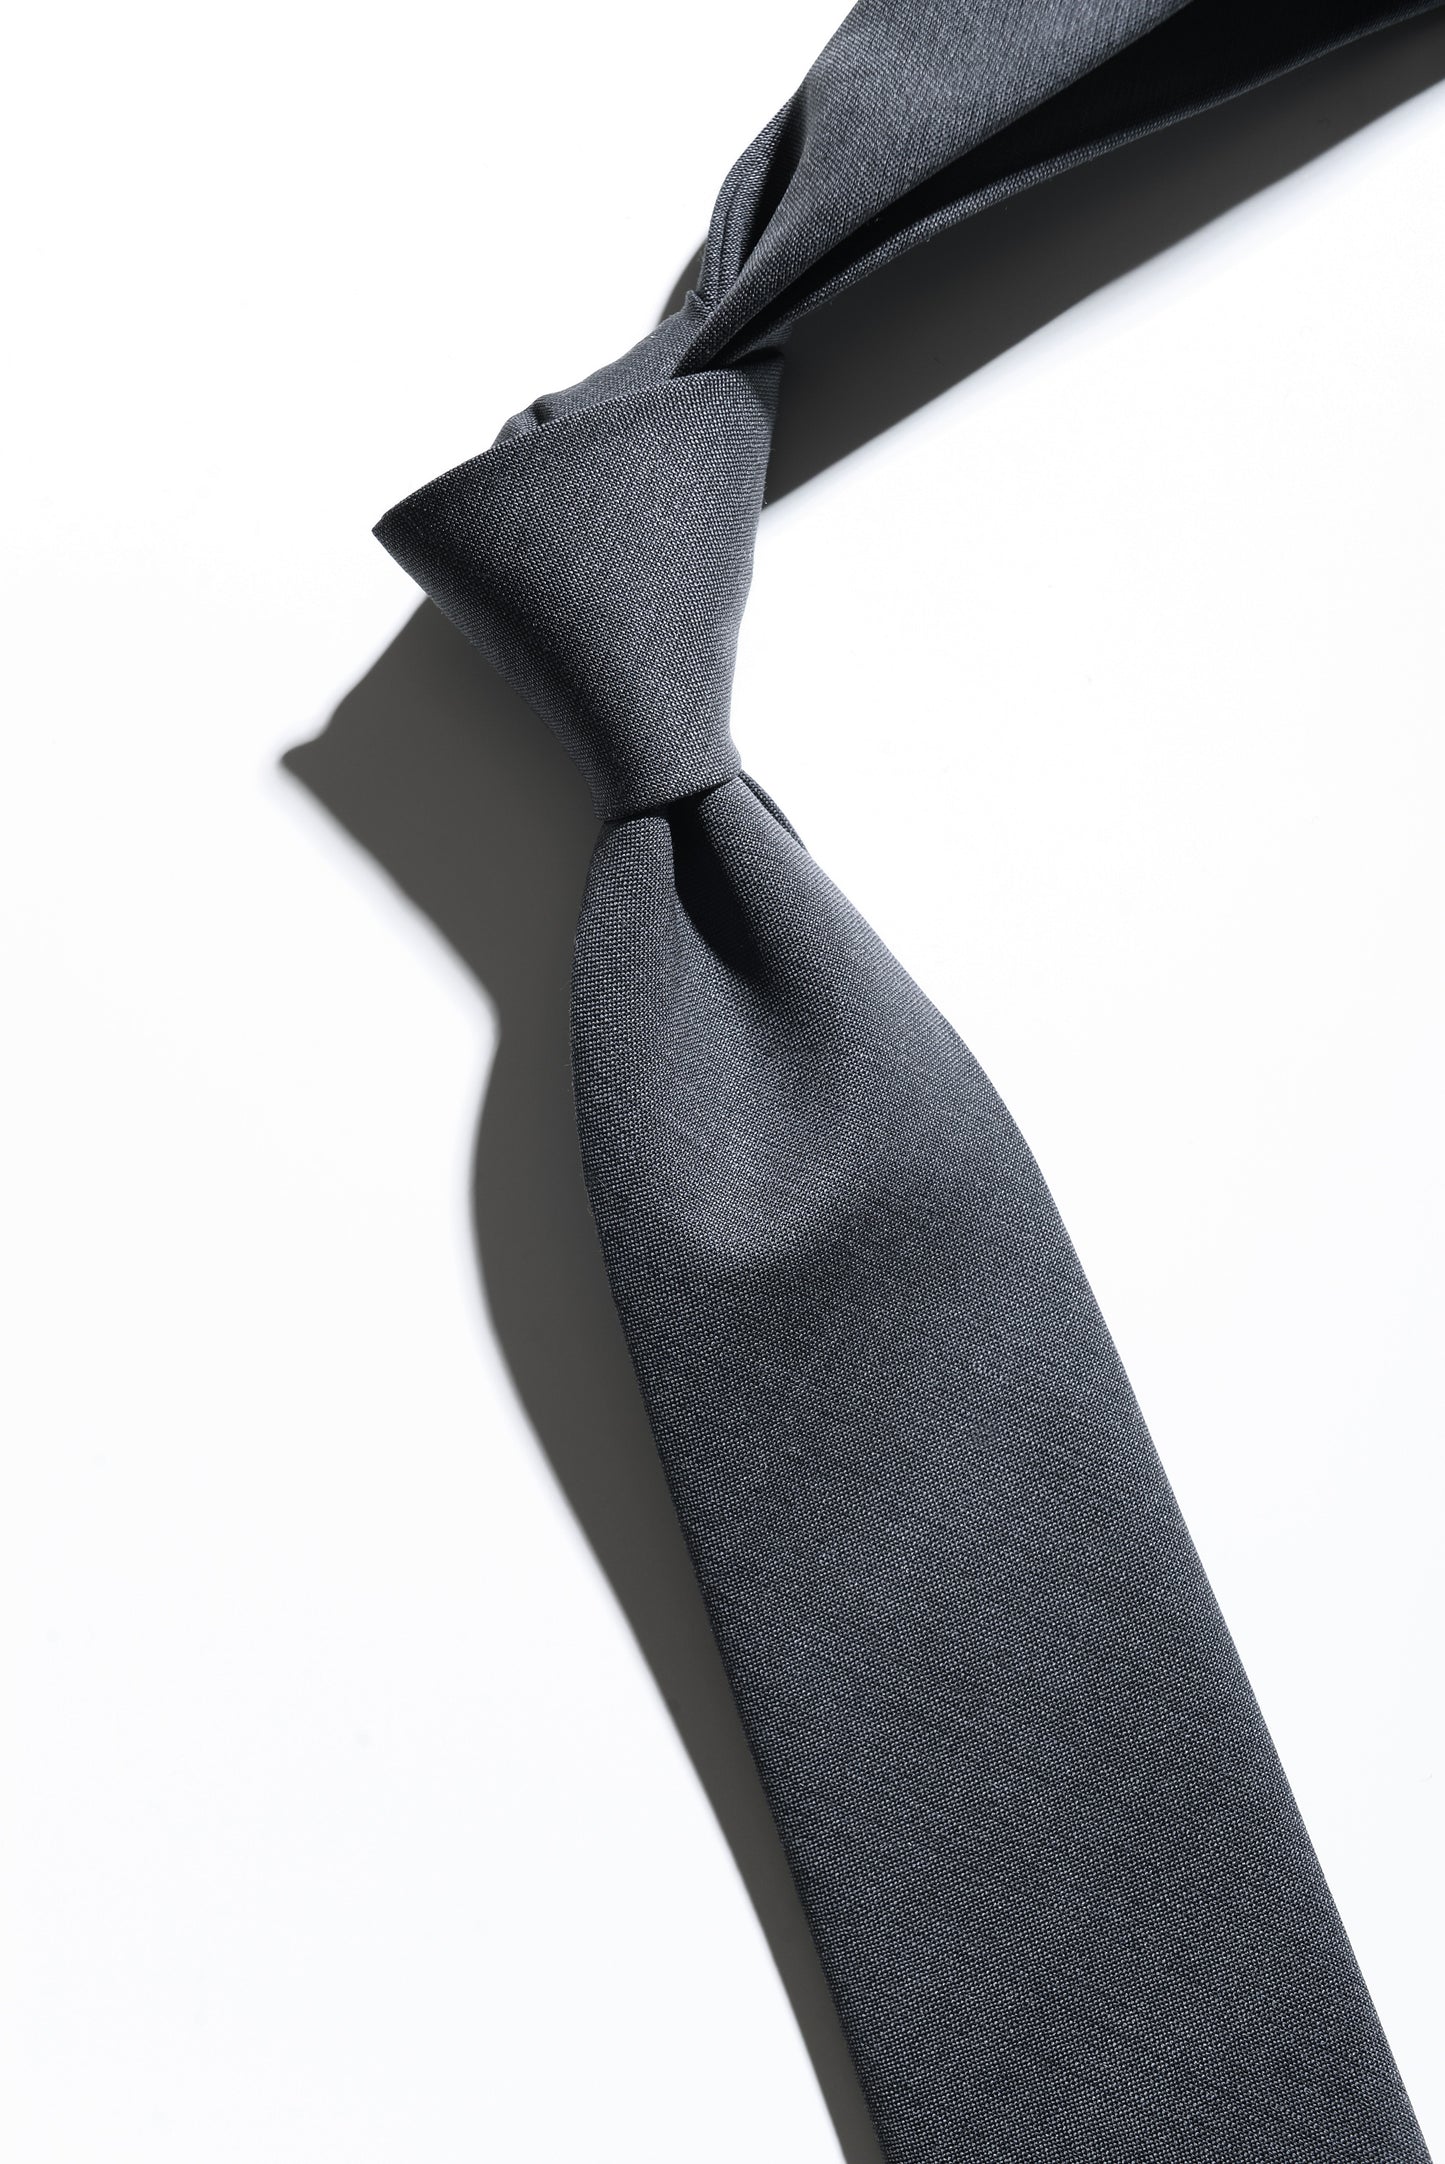 Detail of Super Fine Wool & Mohair Necktie - Petrol Gray showing fabric texture